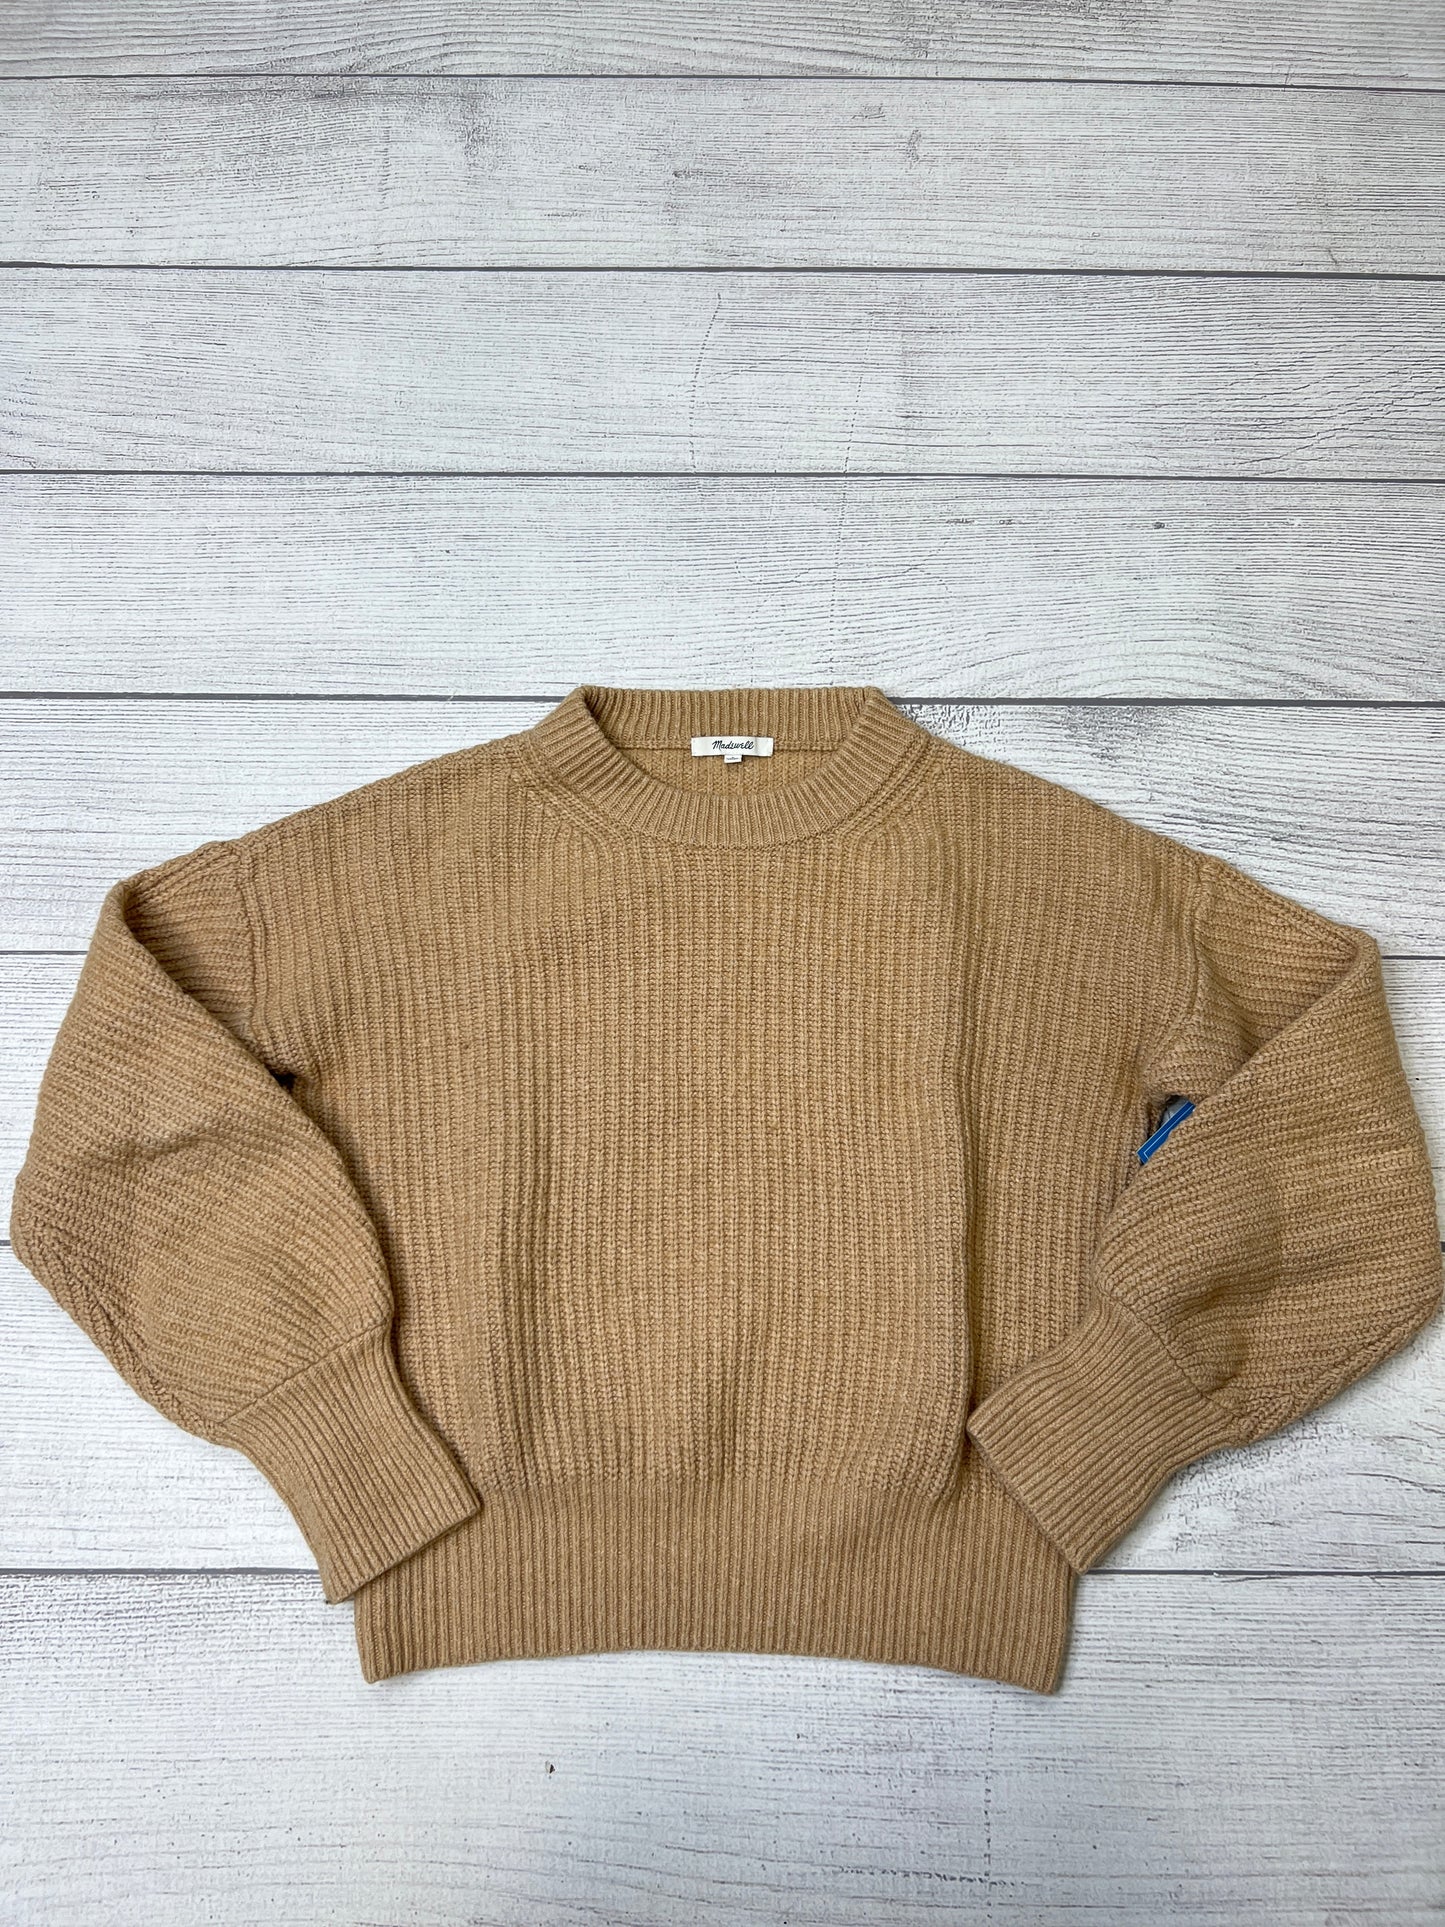 Brown Sweater Madewell, Size S